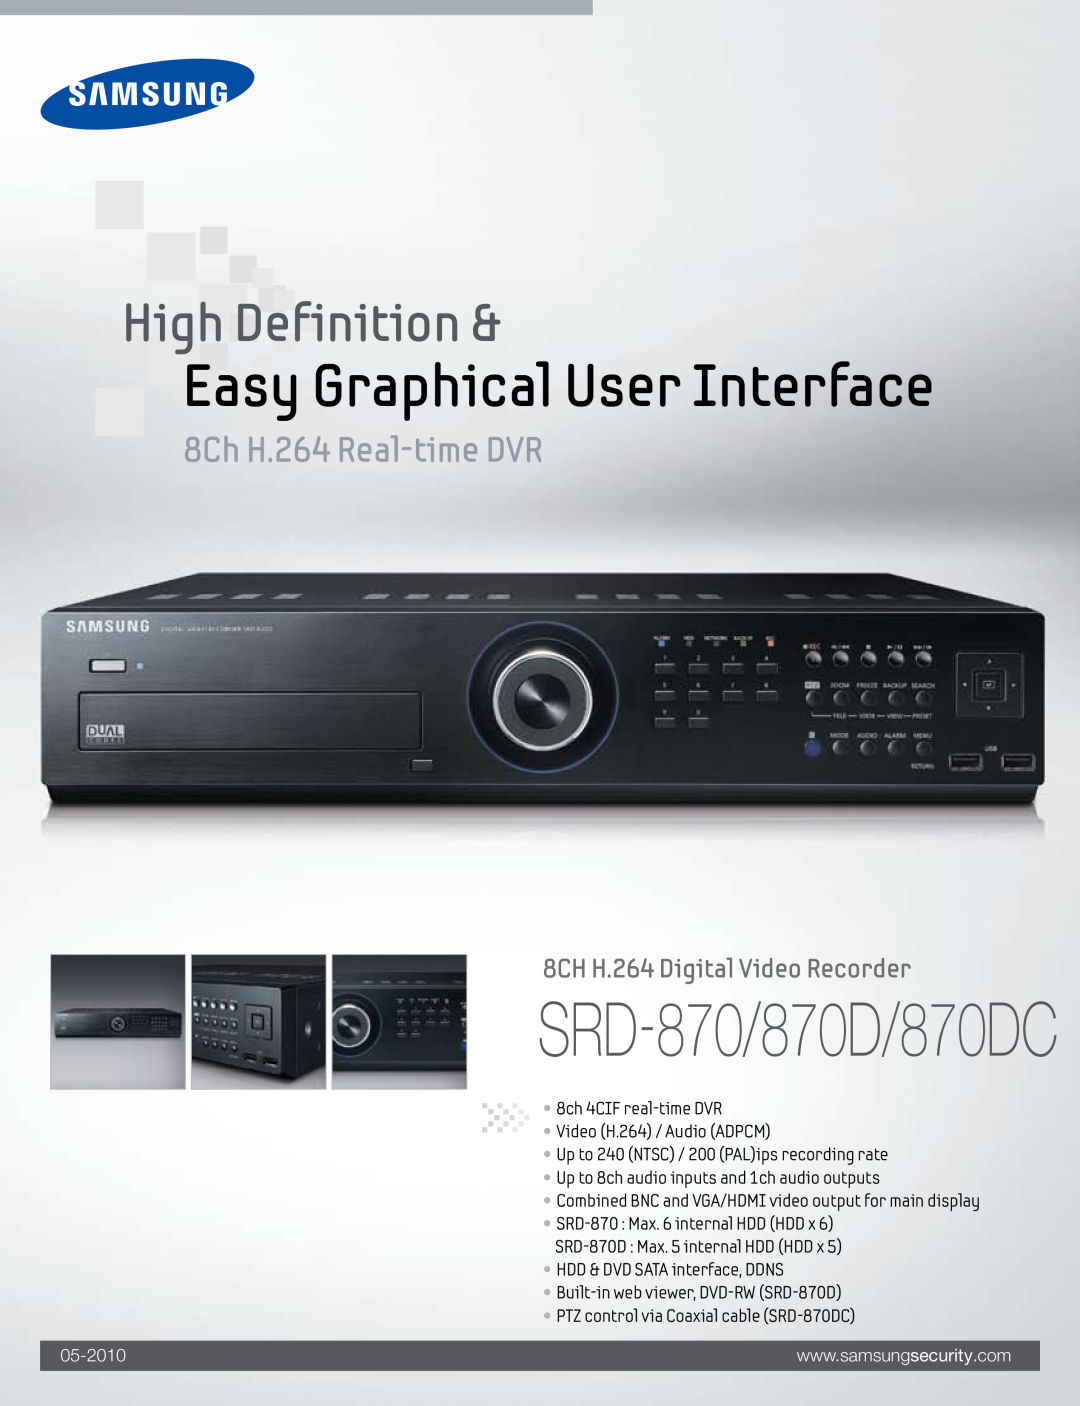 Samsung manual SRD-870/870D/870DC, Easy Graphical User Interface, High Definition, 8Ch H.264 Real-time DVR, 05-2010 